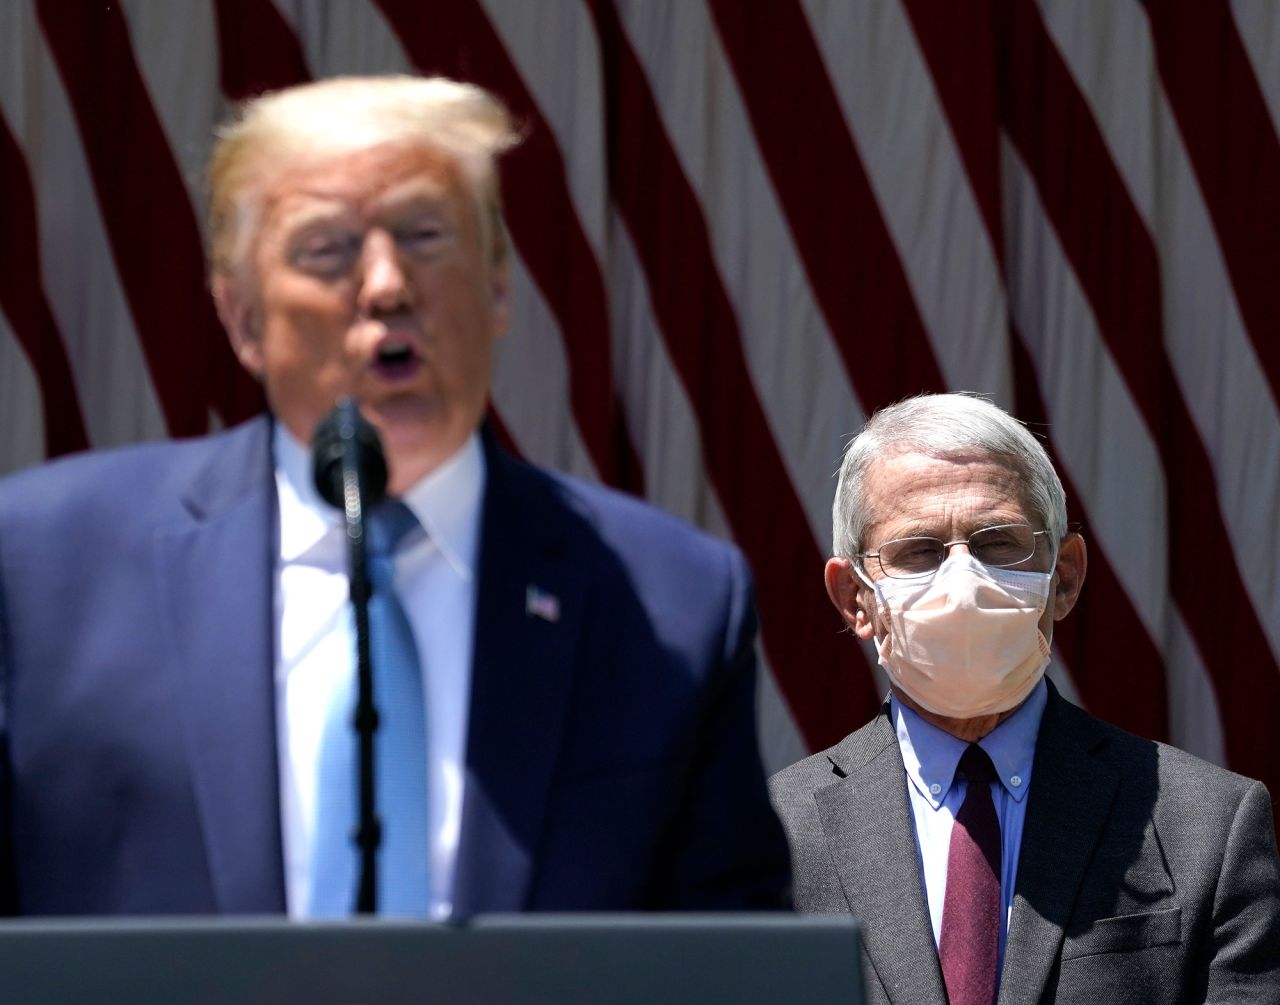 Fauci wears a mask while President Donald Trump speaks about vaccine development in May 2020.